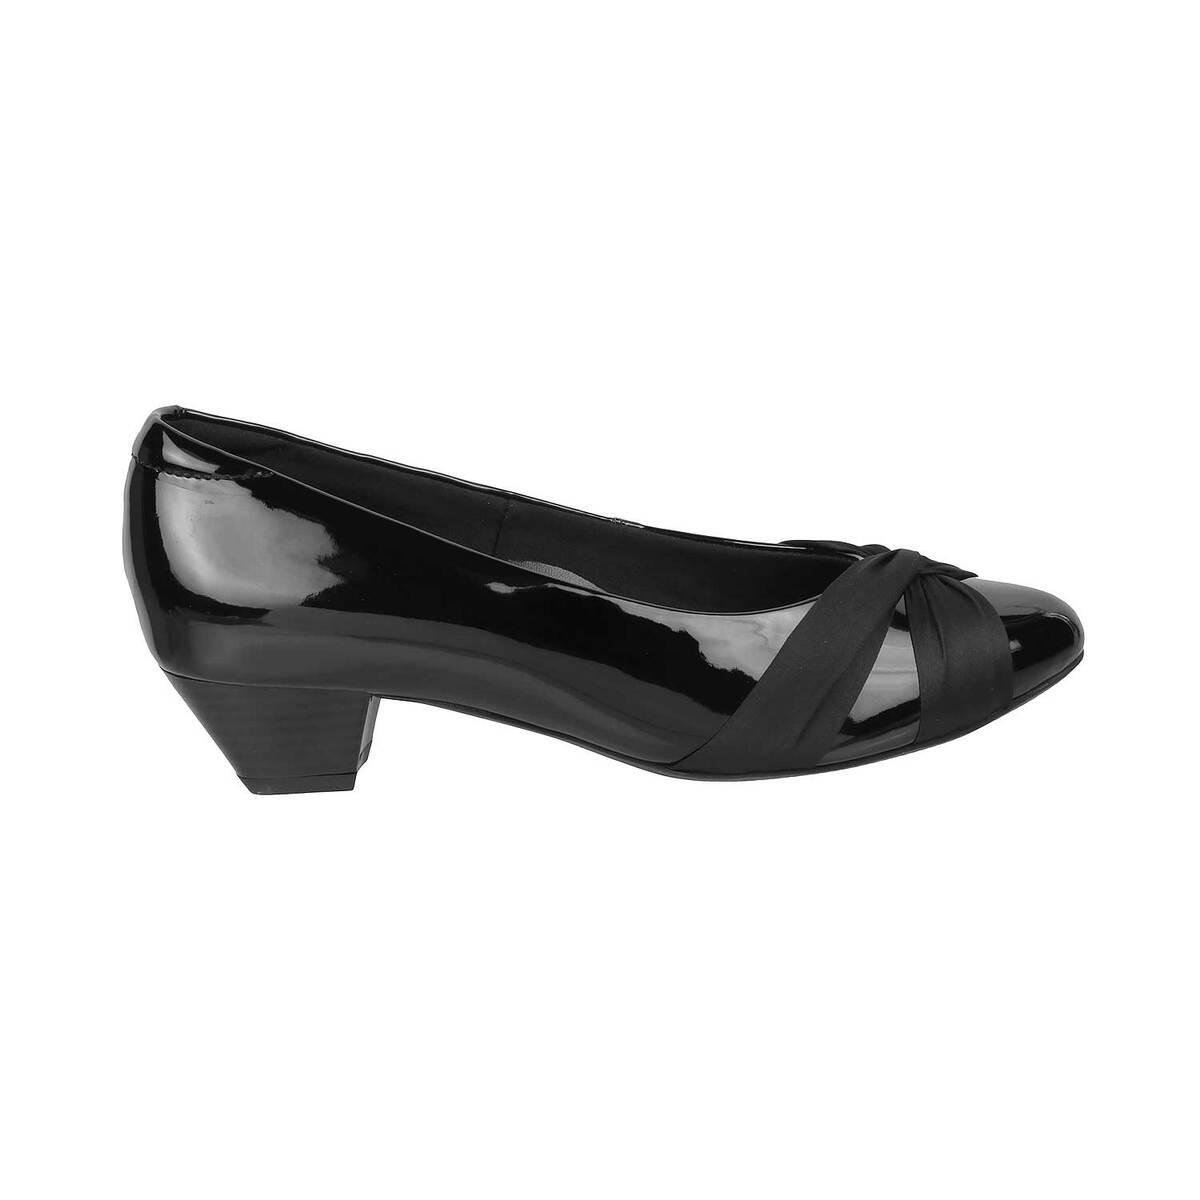 Black Heels: Buy Black Heels for Women Online at Low Prices - Snapdeal India-nlmtdanang.com.vn